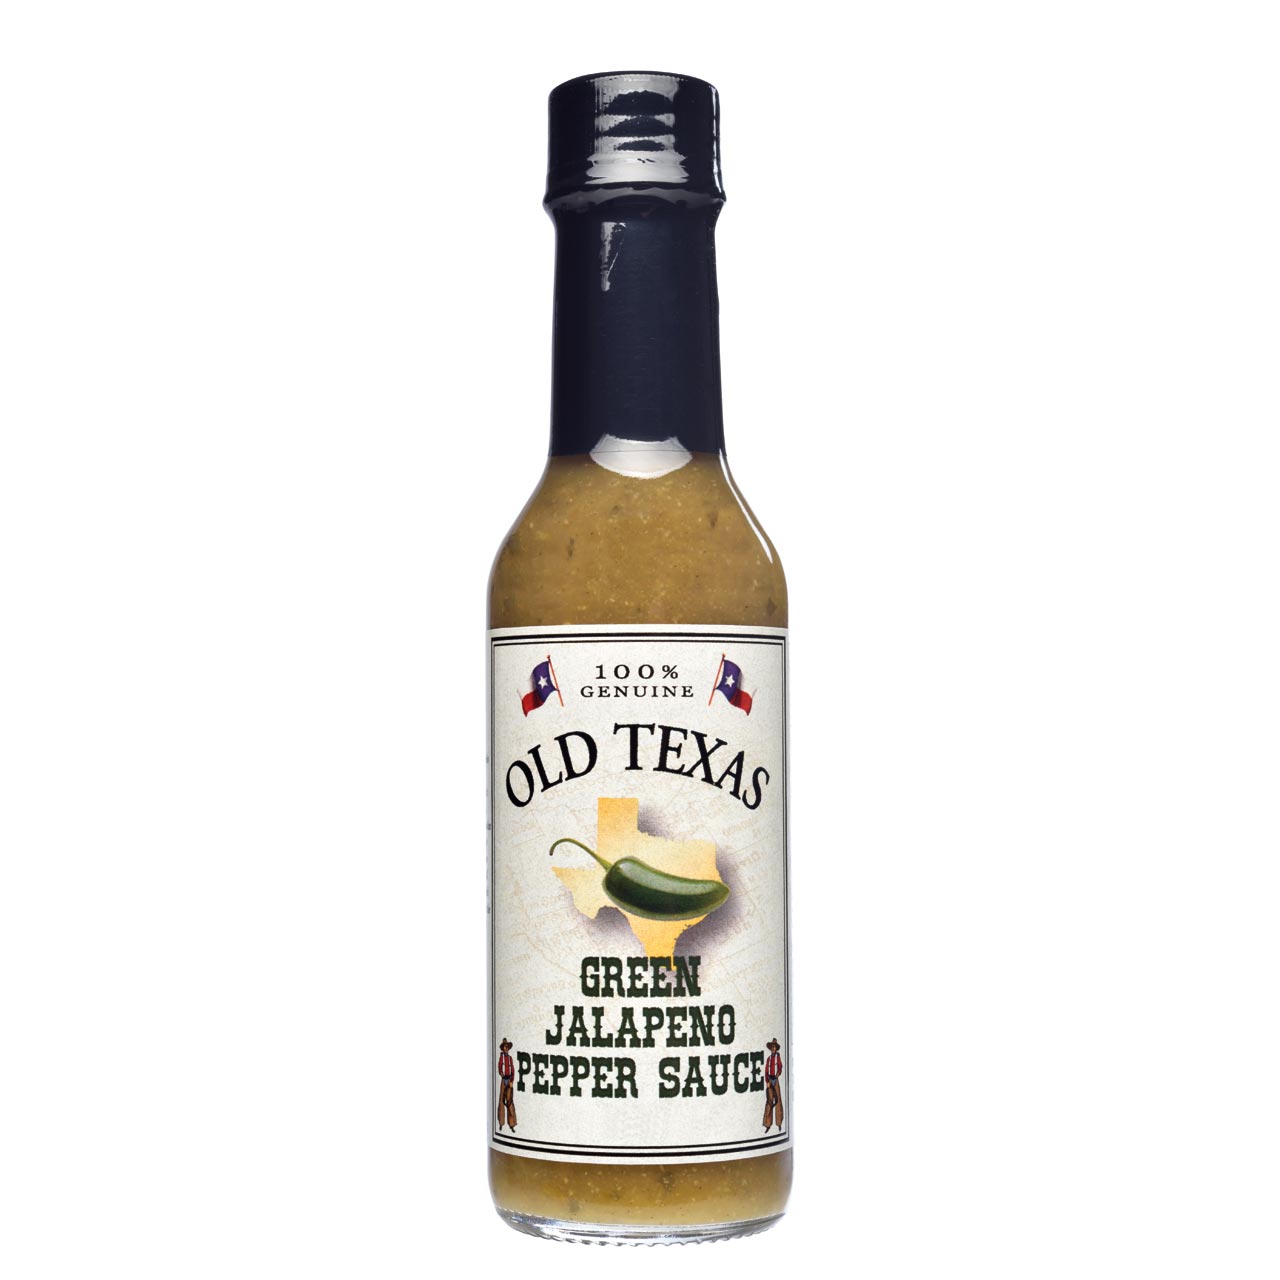 Old Texas Green Jalapeno Pepper Sauce